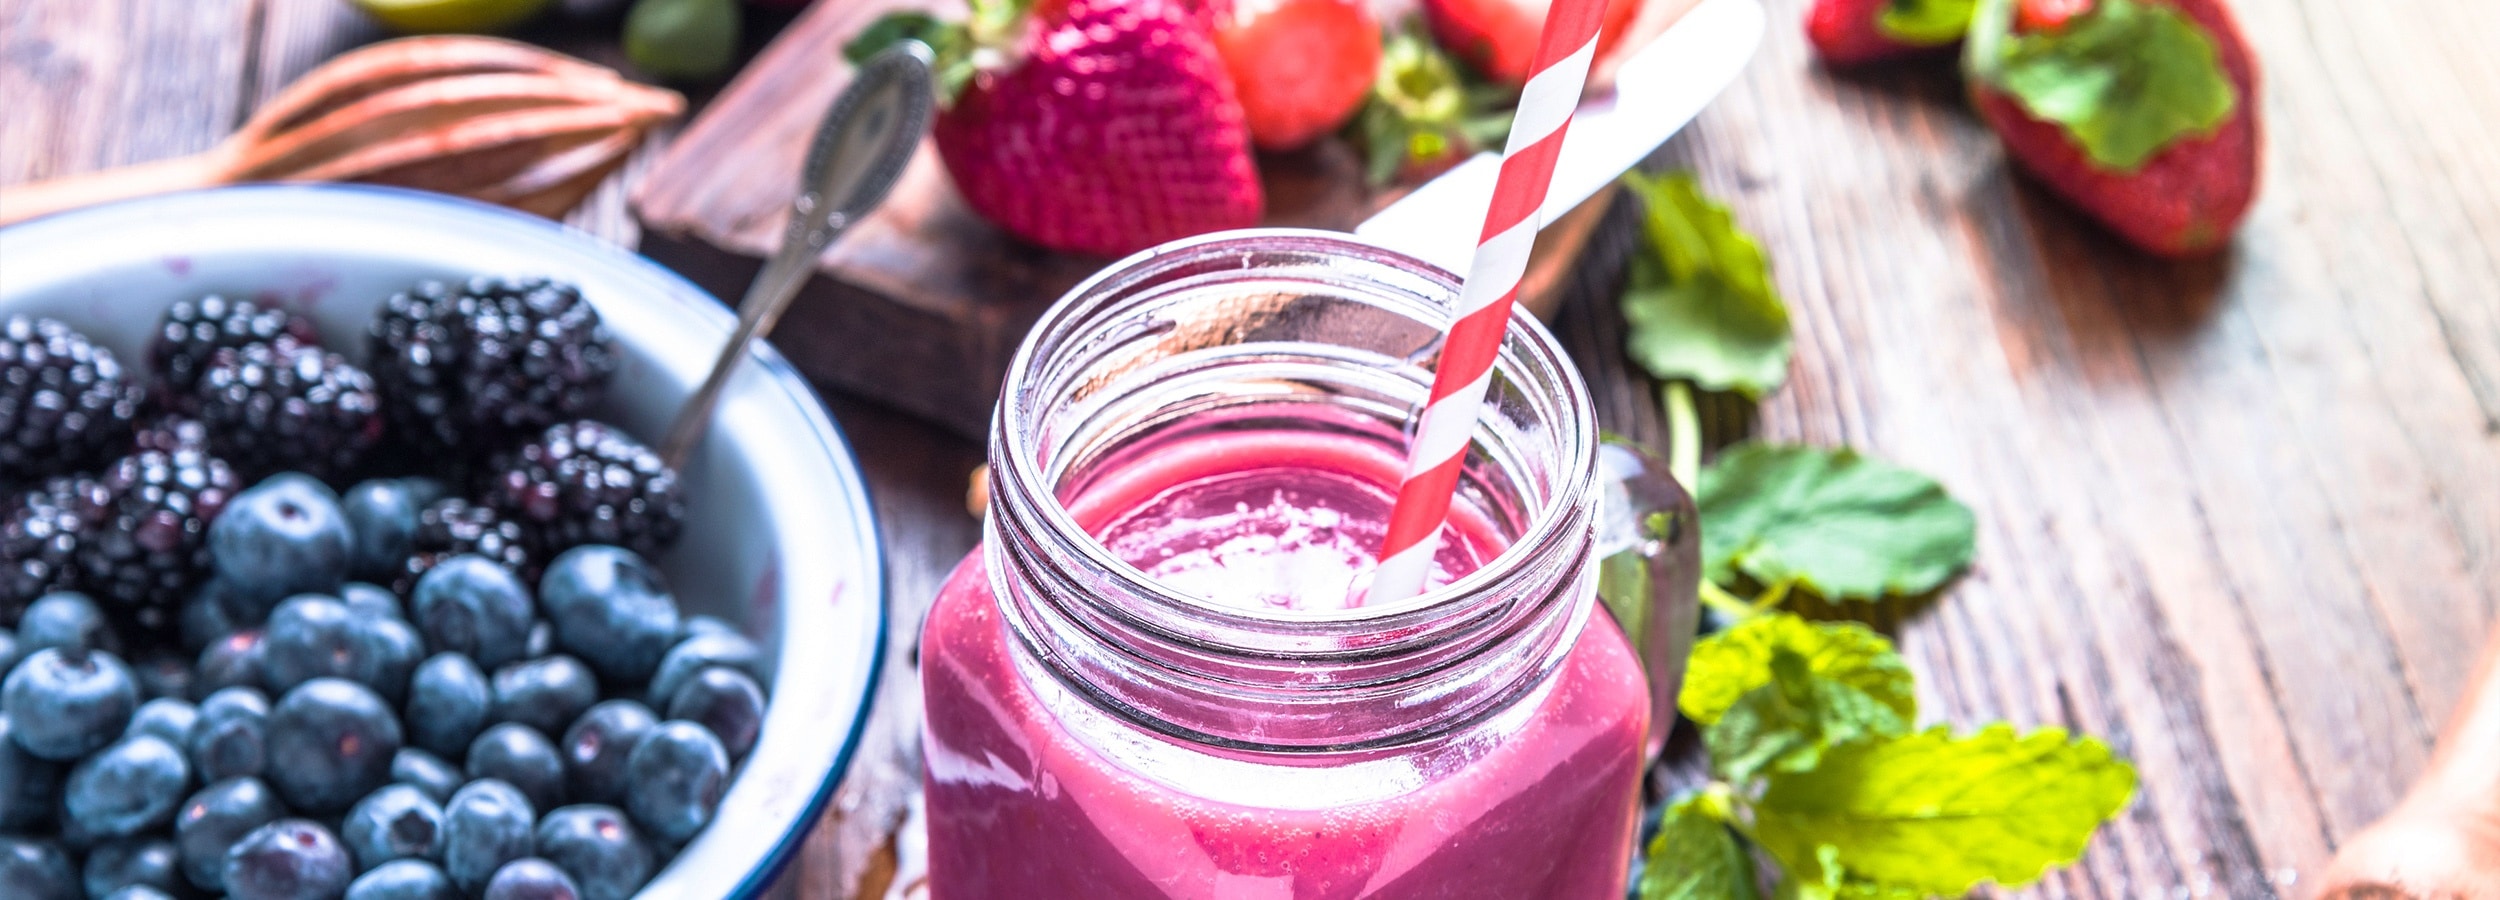 Fruit smoothie with berries and straw